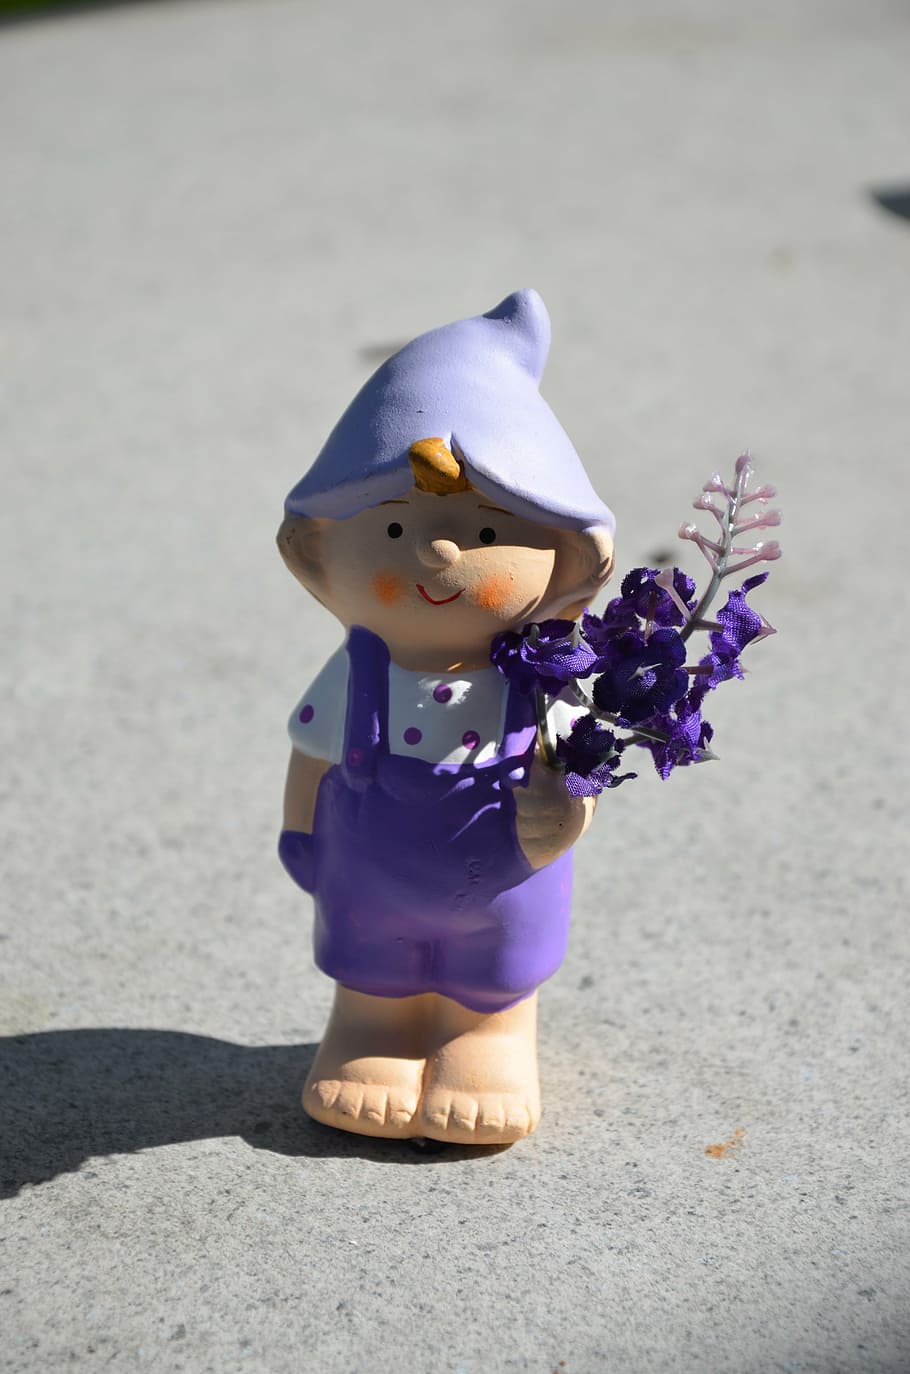 garden gnome, violet, overalls, flowers in the hand, dwarf, representation, toy, childhood, human representation, day